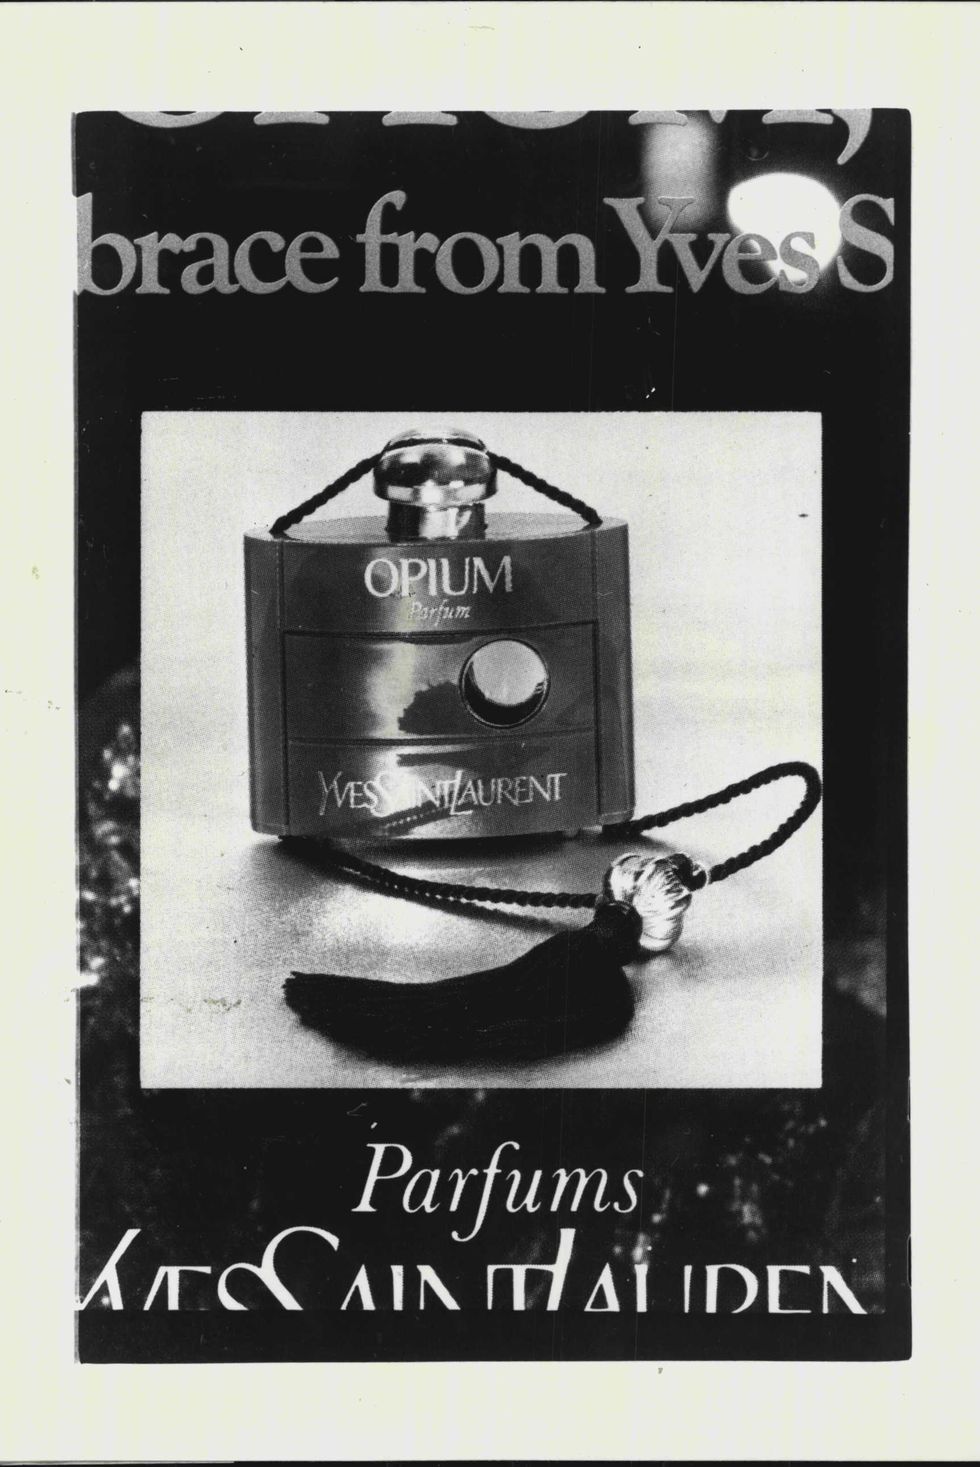 from august issue of vogue australia, magazine, inside page one flap, bottle of opium perfumethe queensland health department has banned a perfume named opium from the paris fashion house of yves saint laurent august 29, 1978 photo by paul stephen pearsonfairfax media via getty images